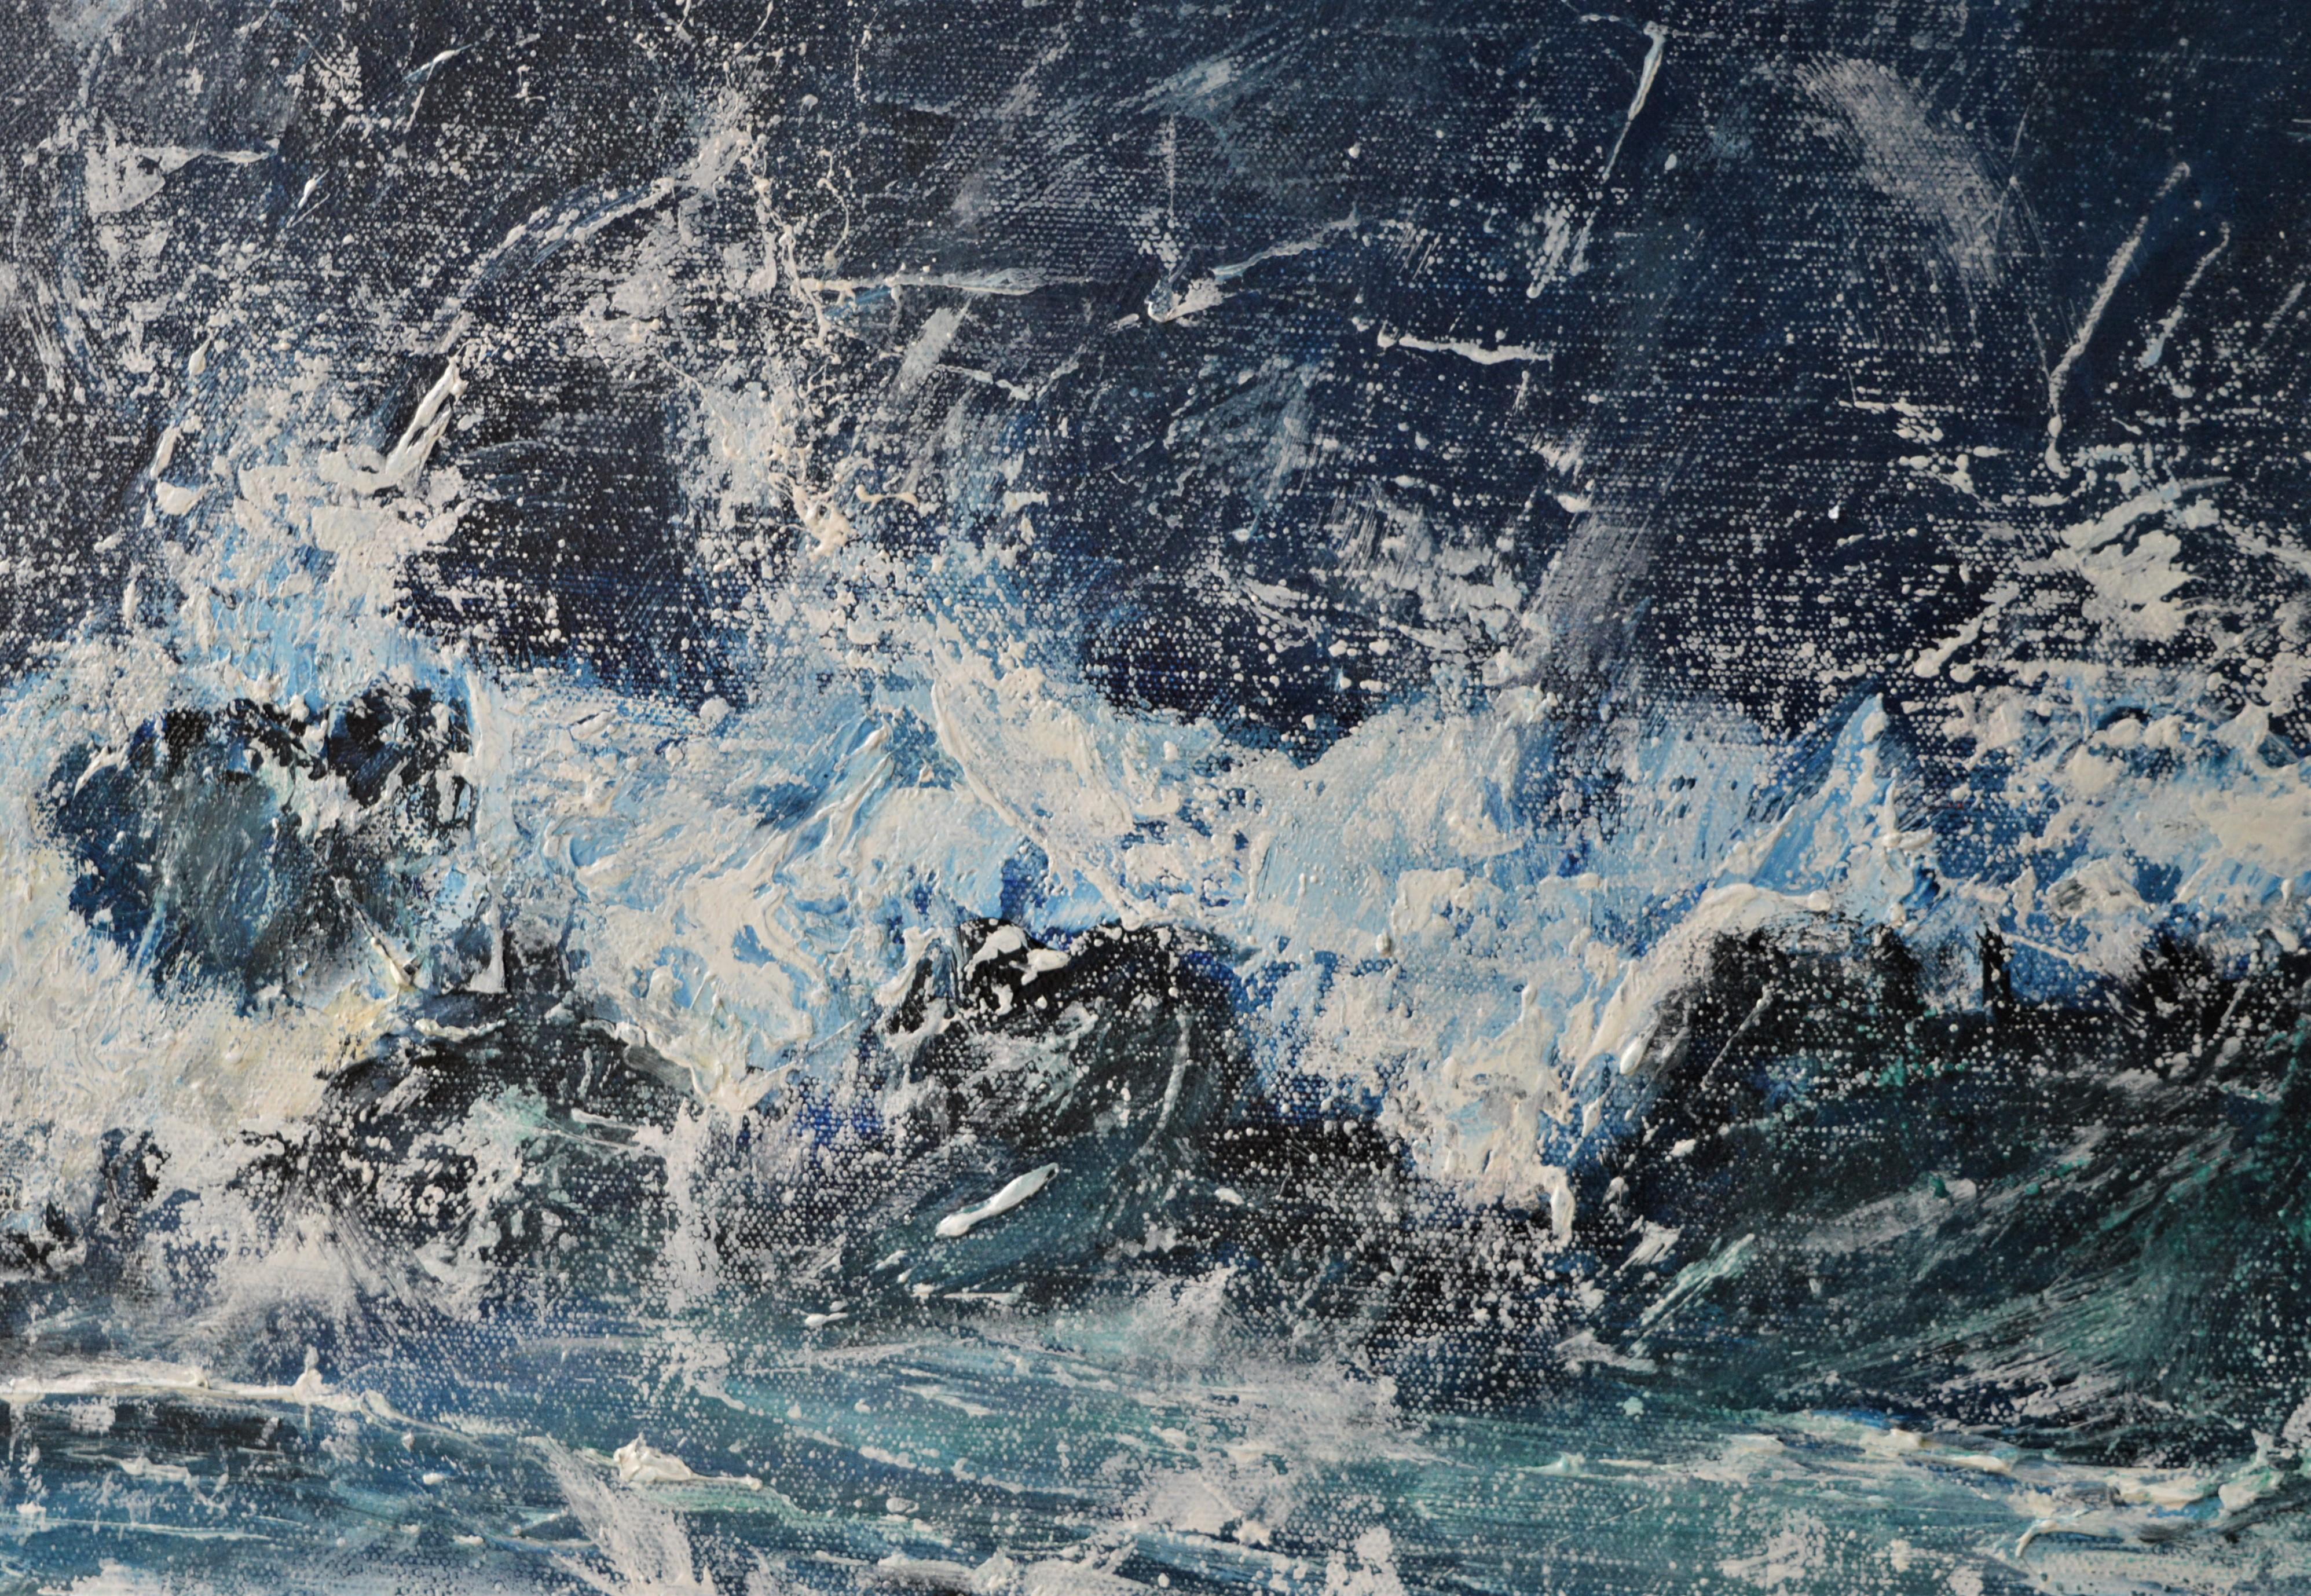 It is the middle of summer and a strong southerly kicks up the sea so that it pounds against the shore. On a balmy, moonlit night in July, spray fills the air and a silvery reflection bounces off the water. Using a very limited palette of Cerulean,